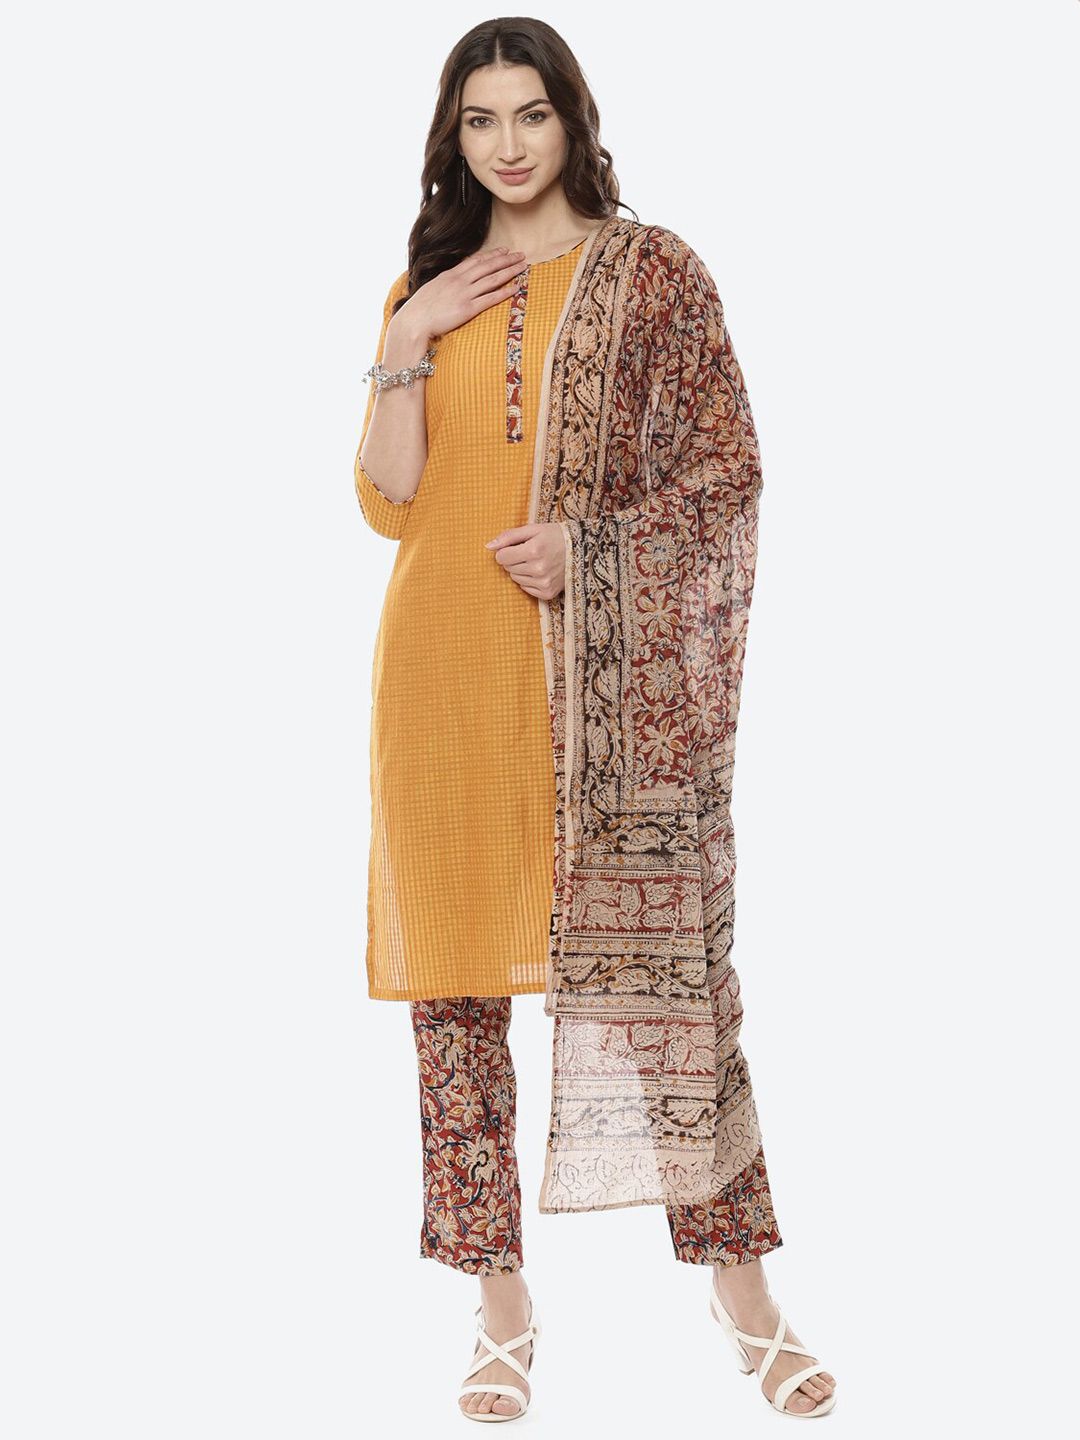 Biba Yellow & Brown Printed Pure Cotton Unstitched Dress Material Price in India